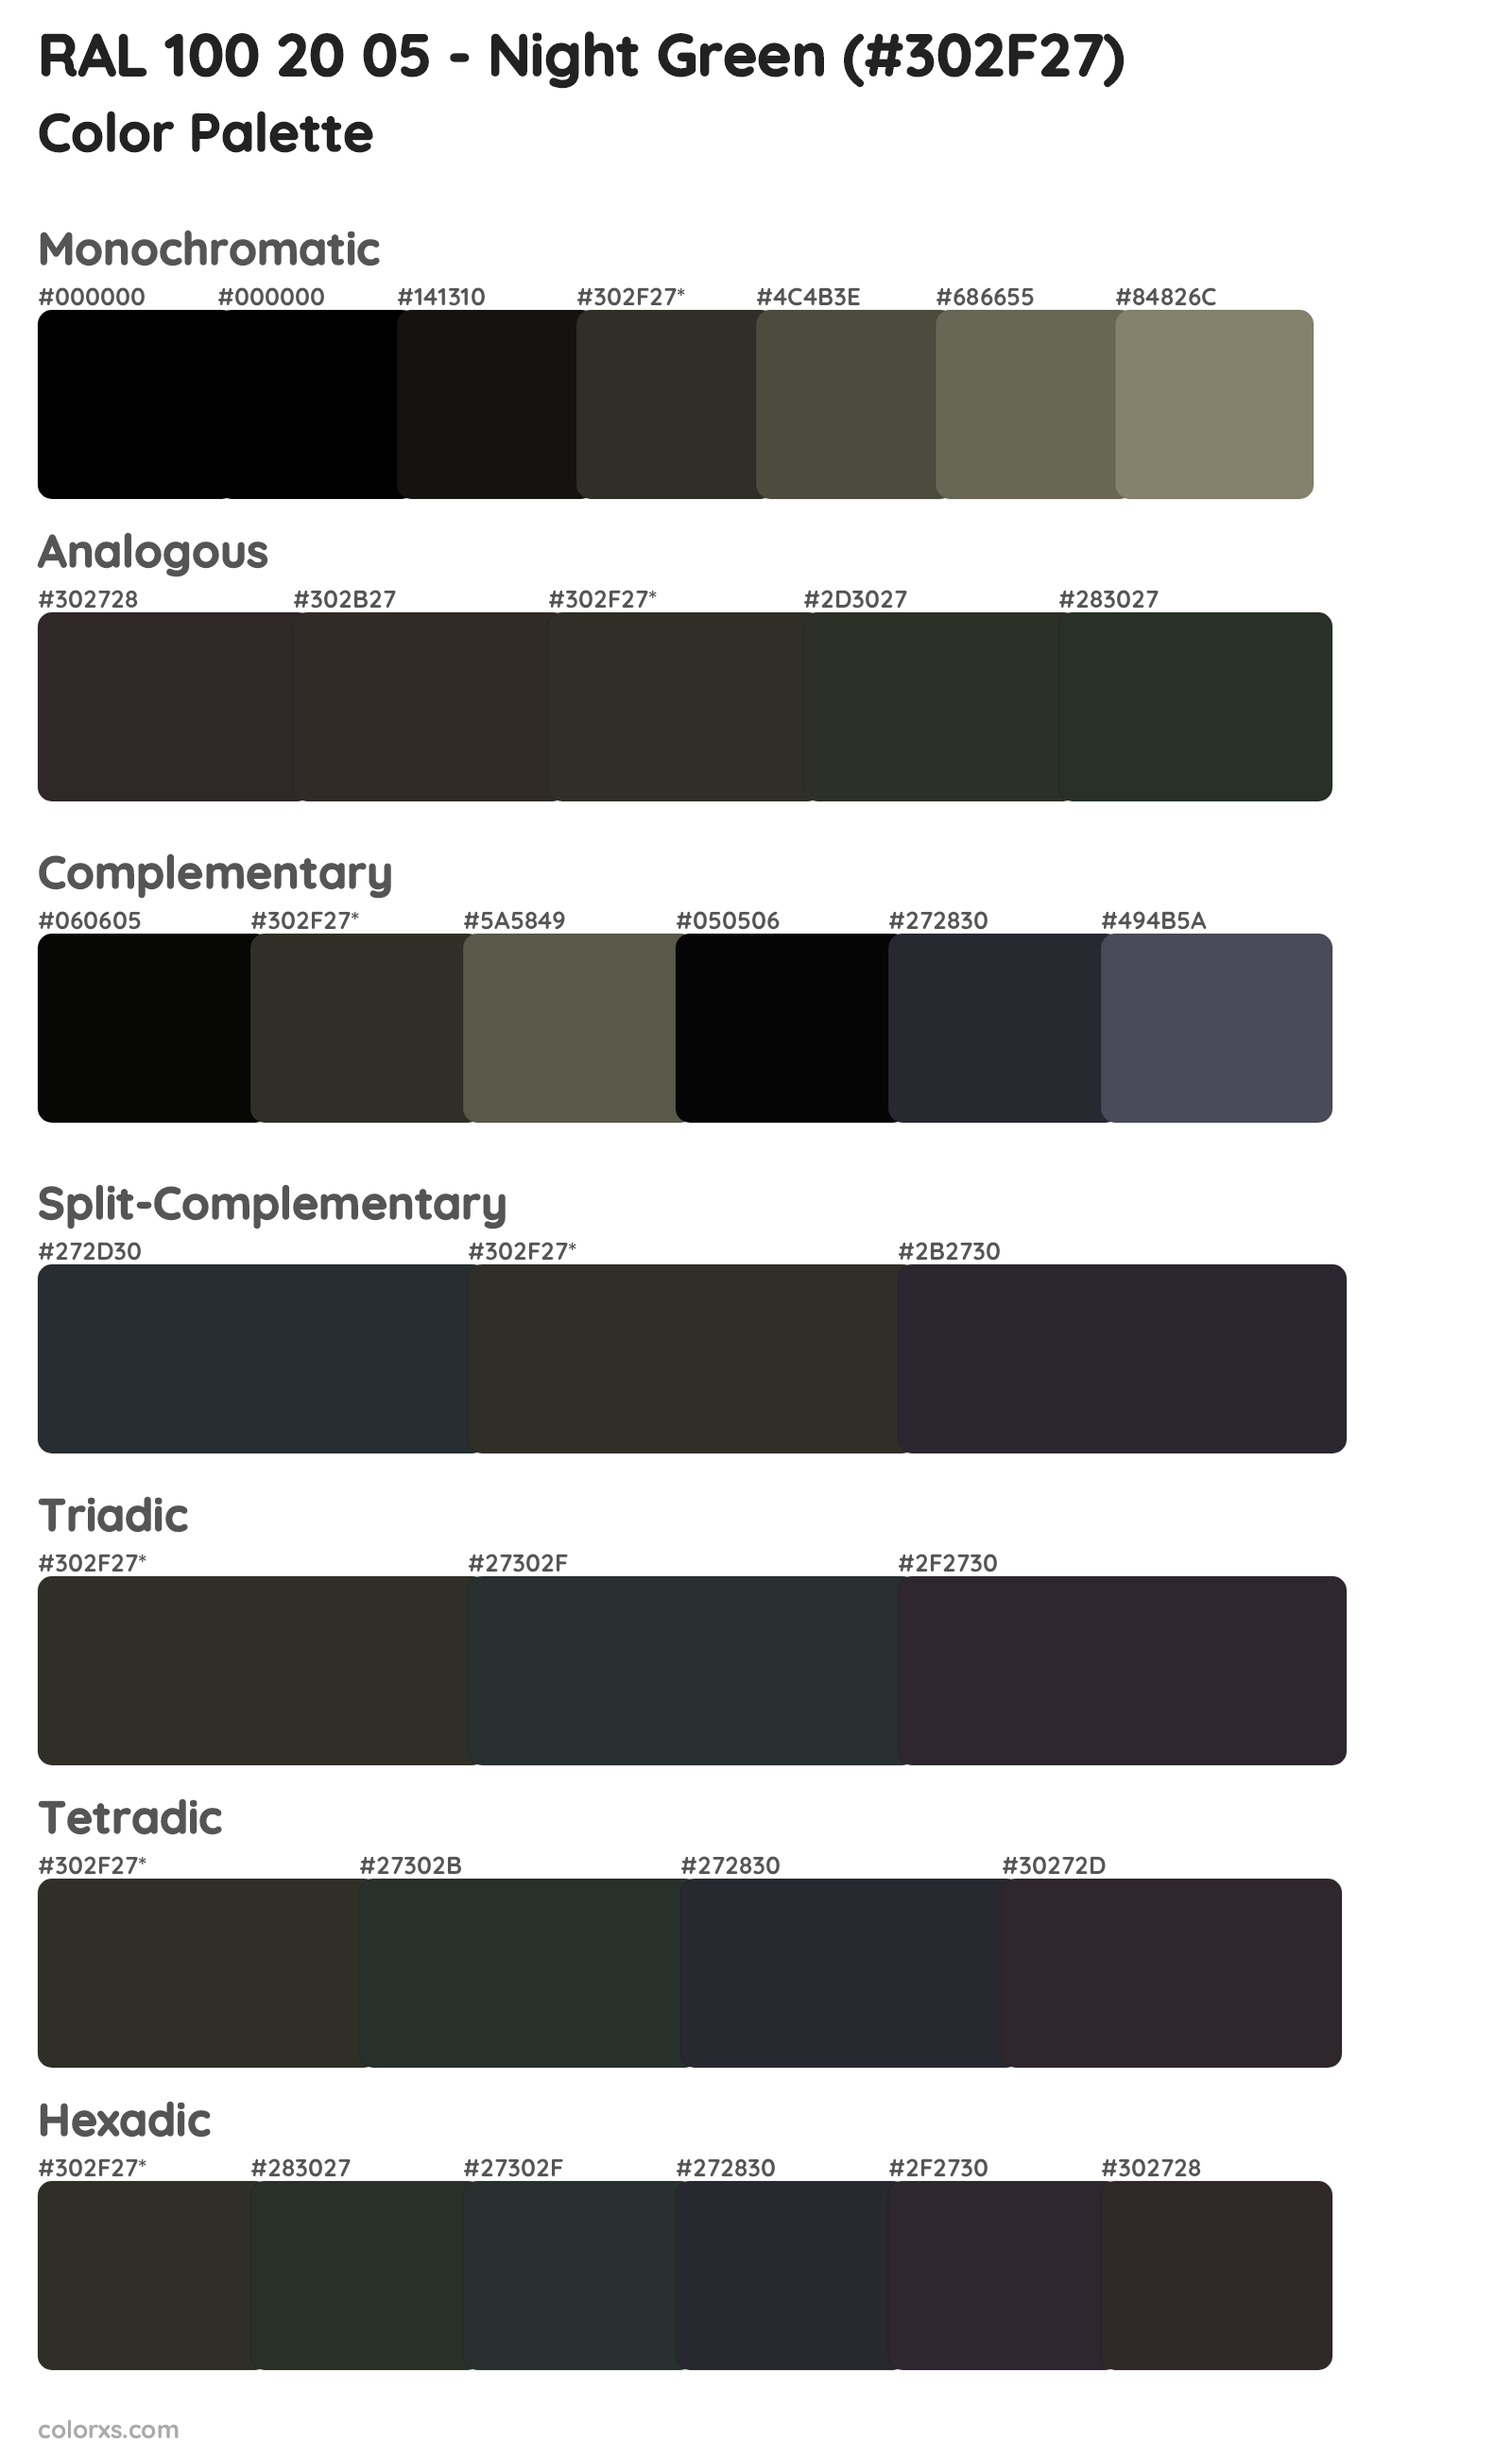 RAL 100 20 05 - Night Green Color Scheme Palettes